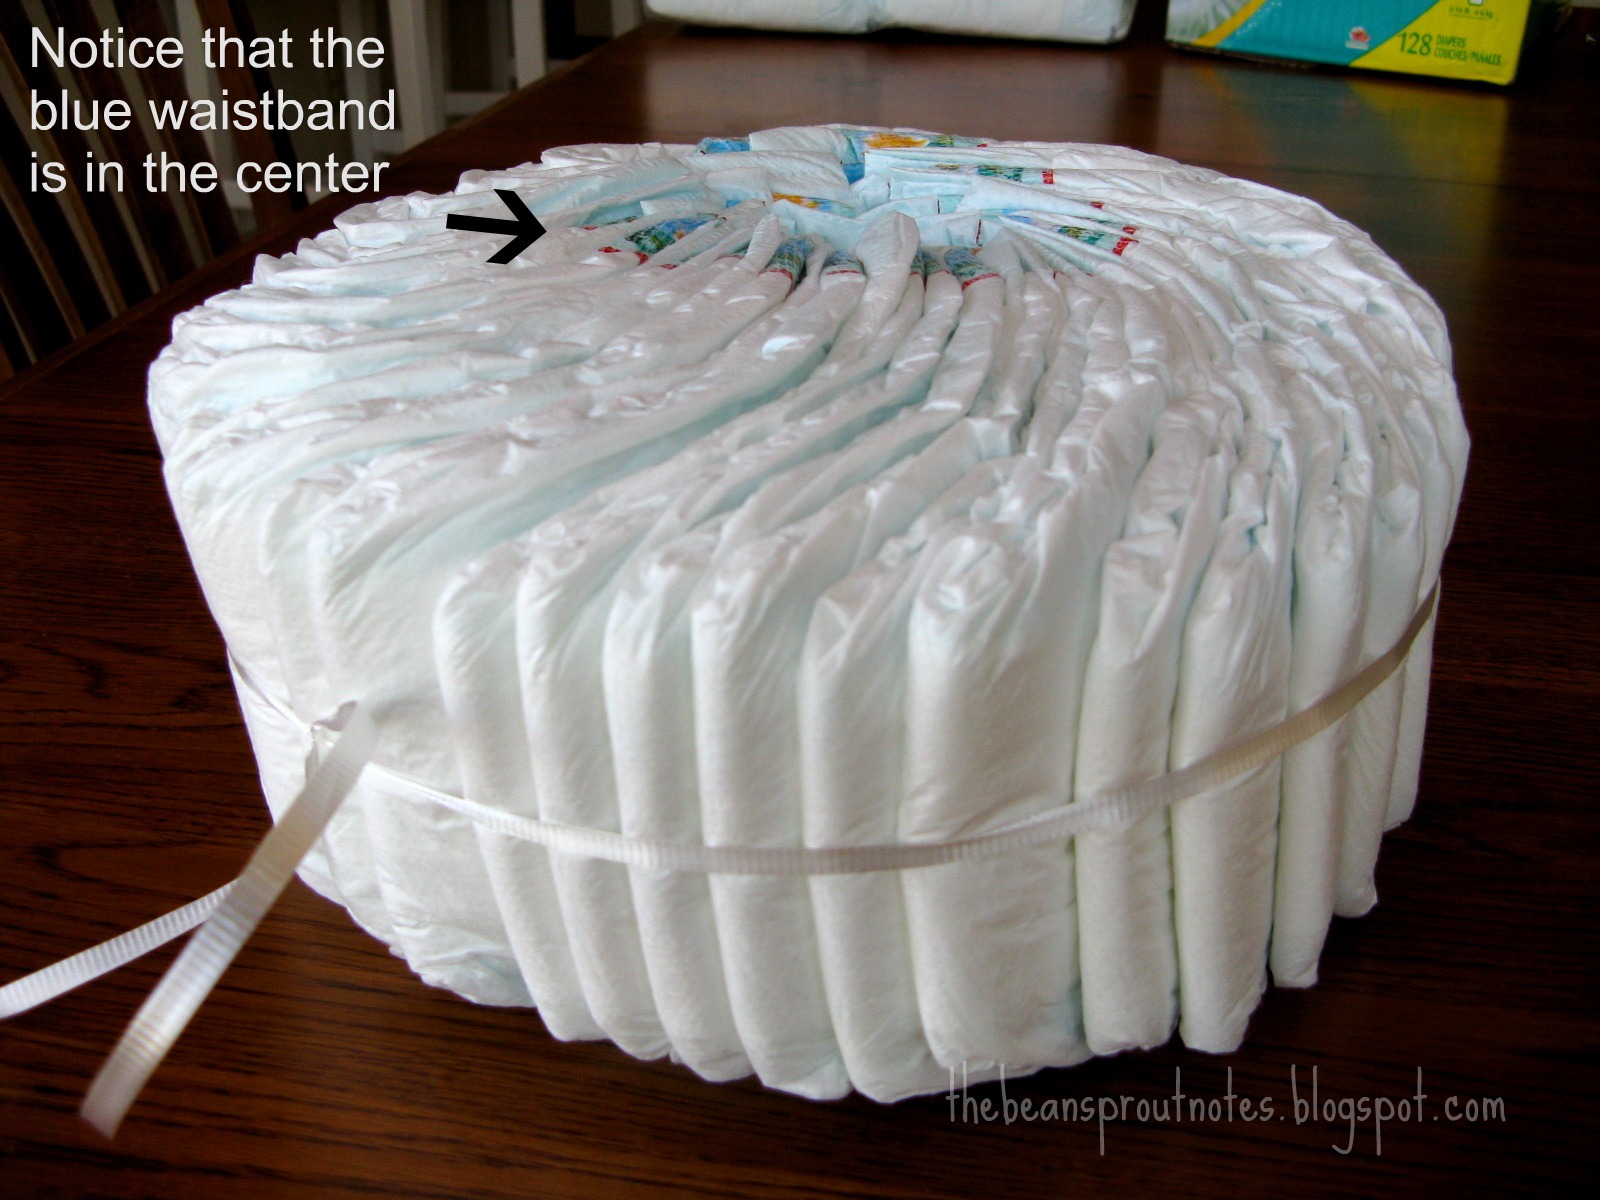 Where can you find instructions for a two-tier diaper cake for twins?